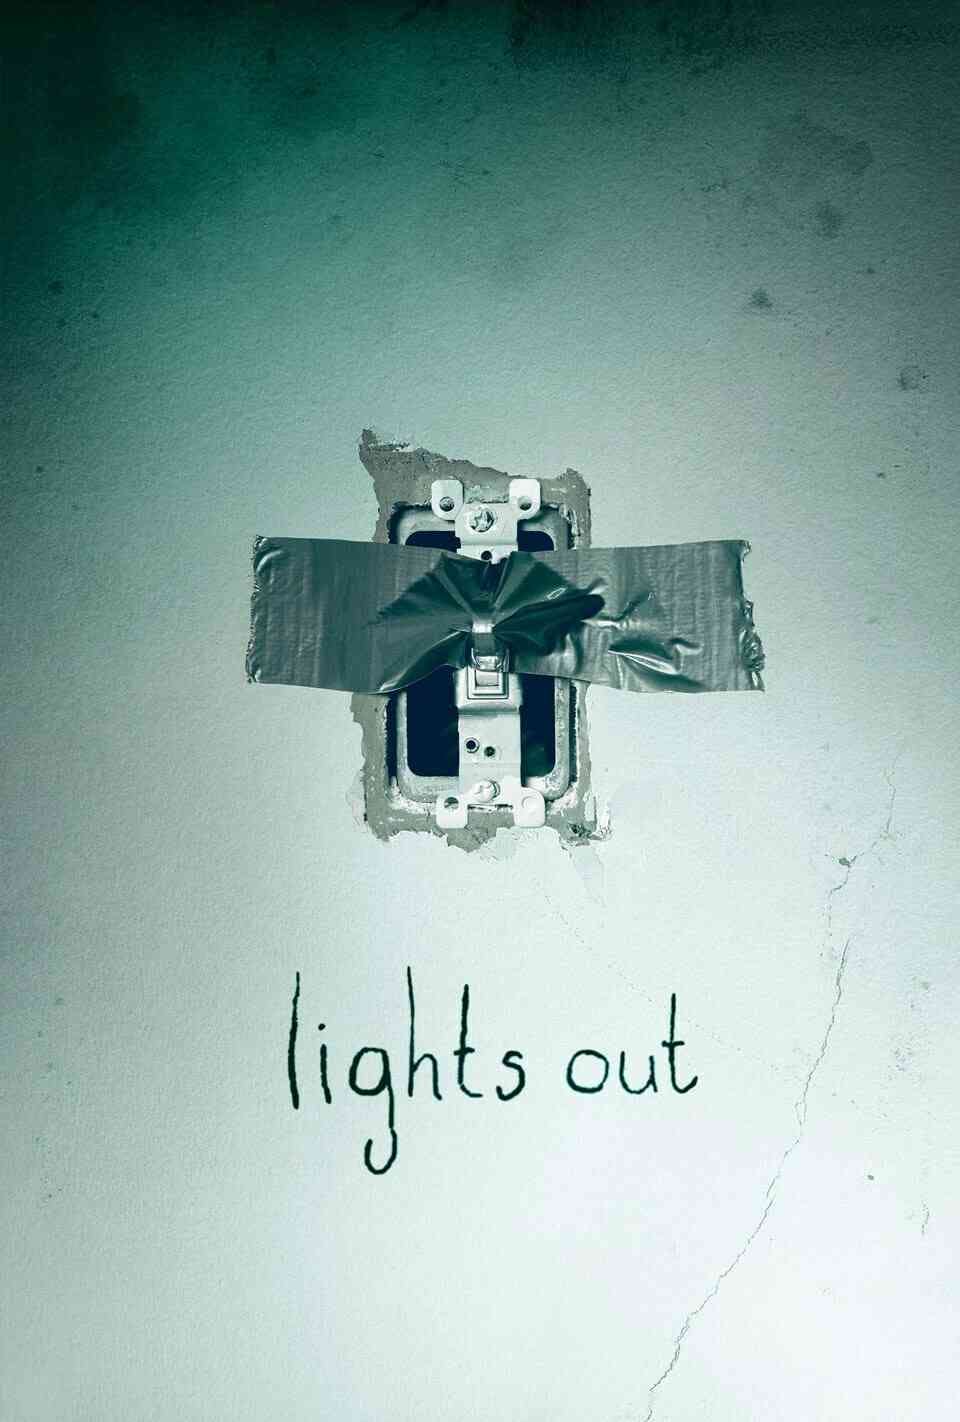 Read Lights Out screenplay.